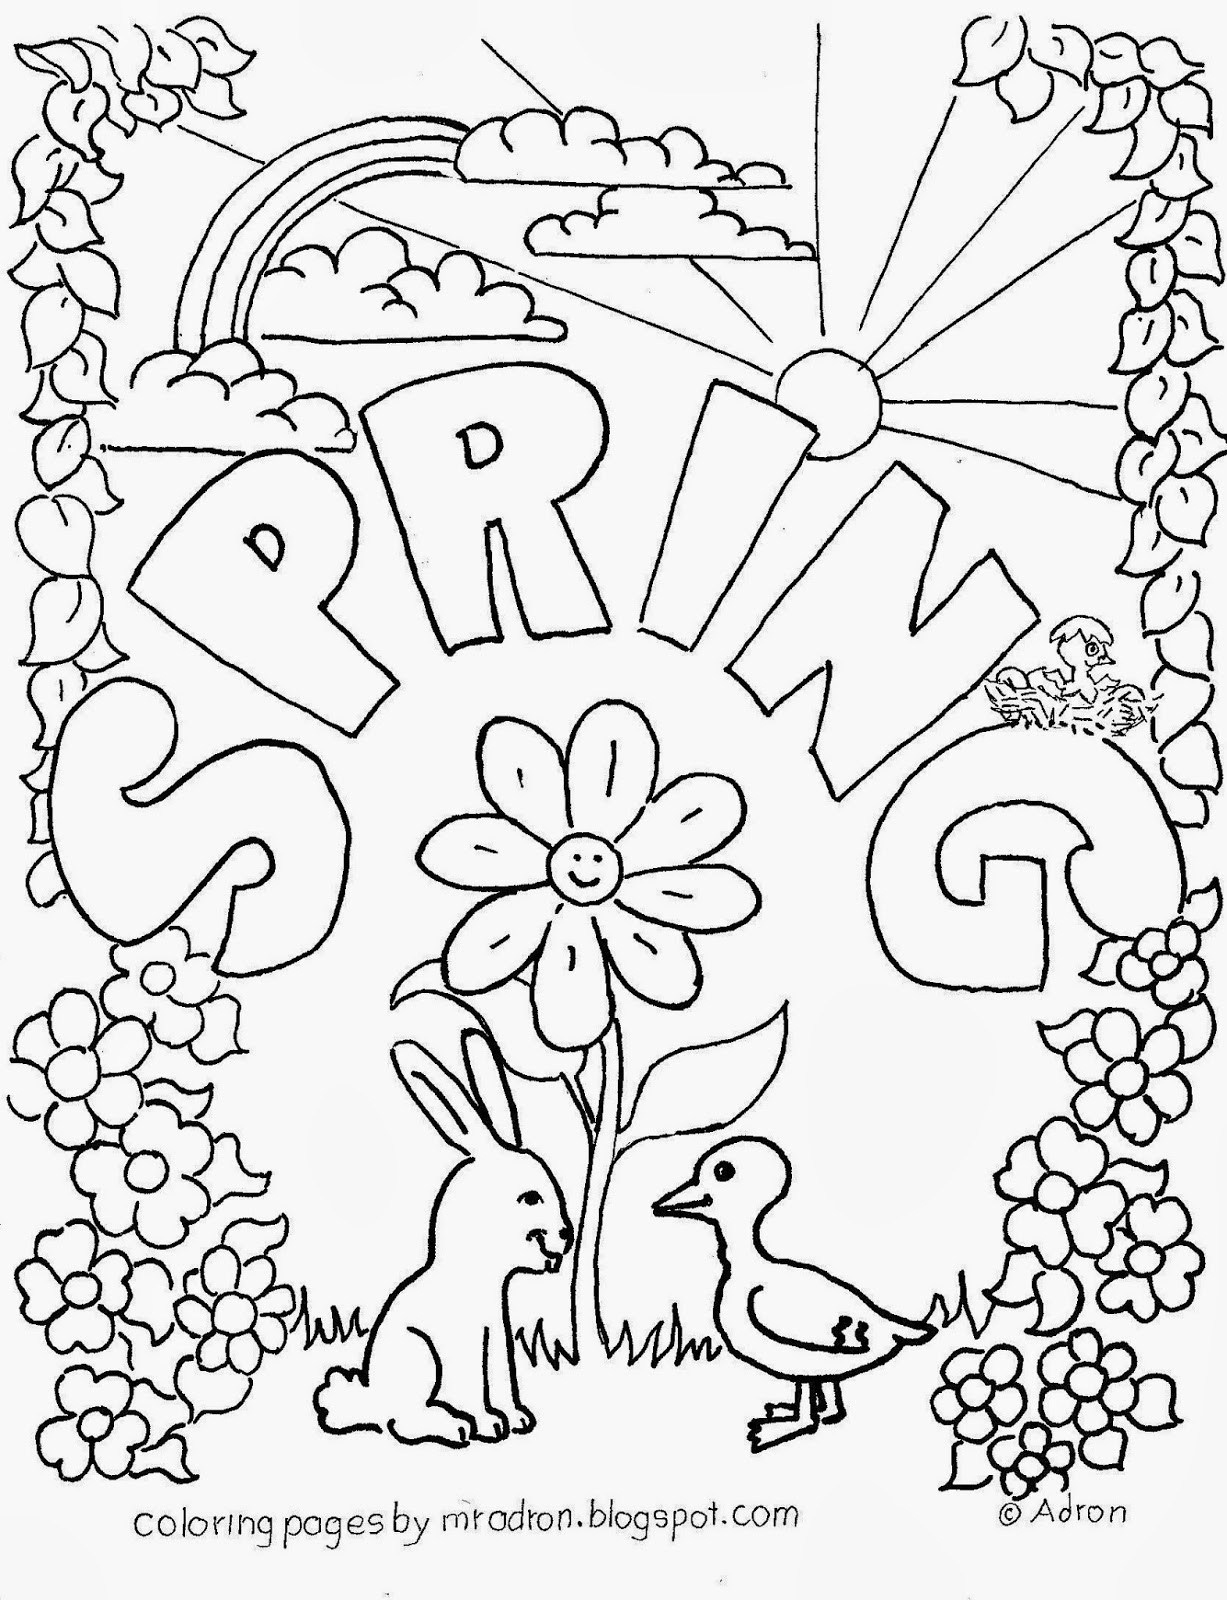 Free Printable Spring Coloring Pages For Adults | Free Printable